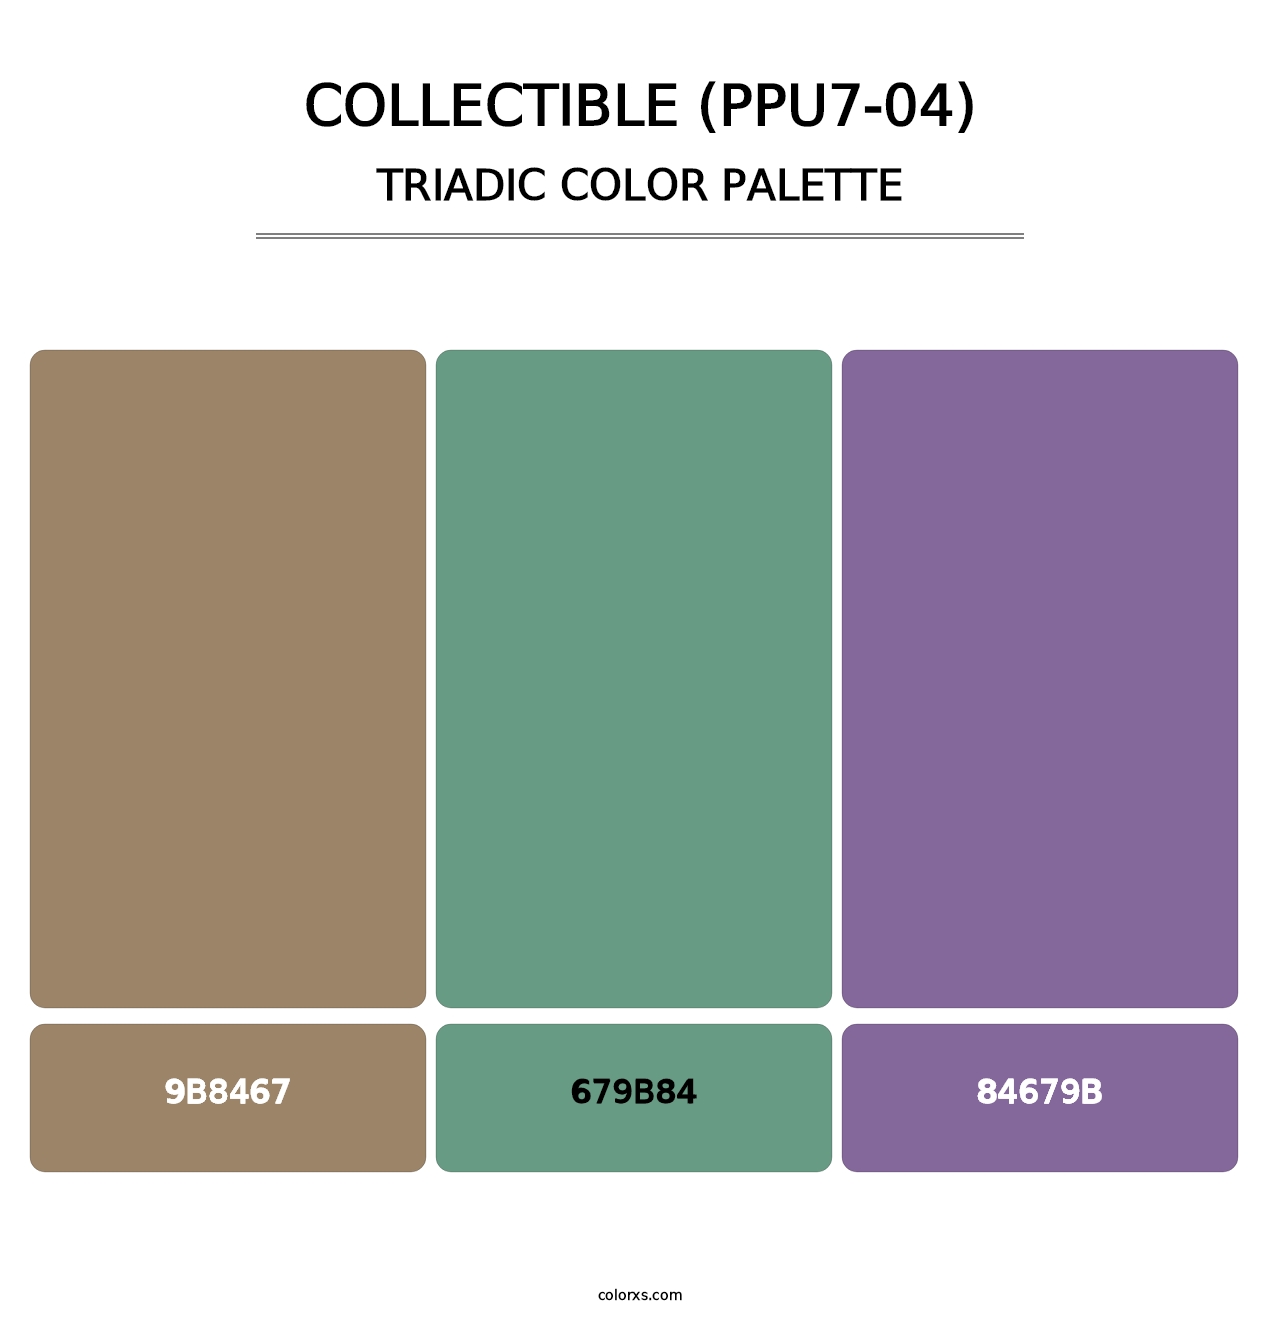 Collectible (PPU7-04) - Triadic Color Palette